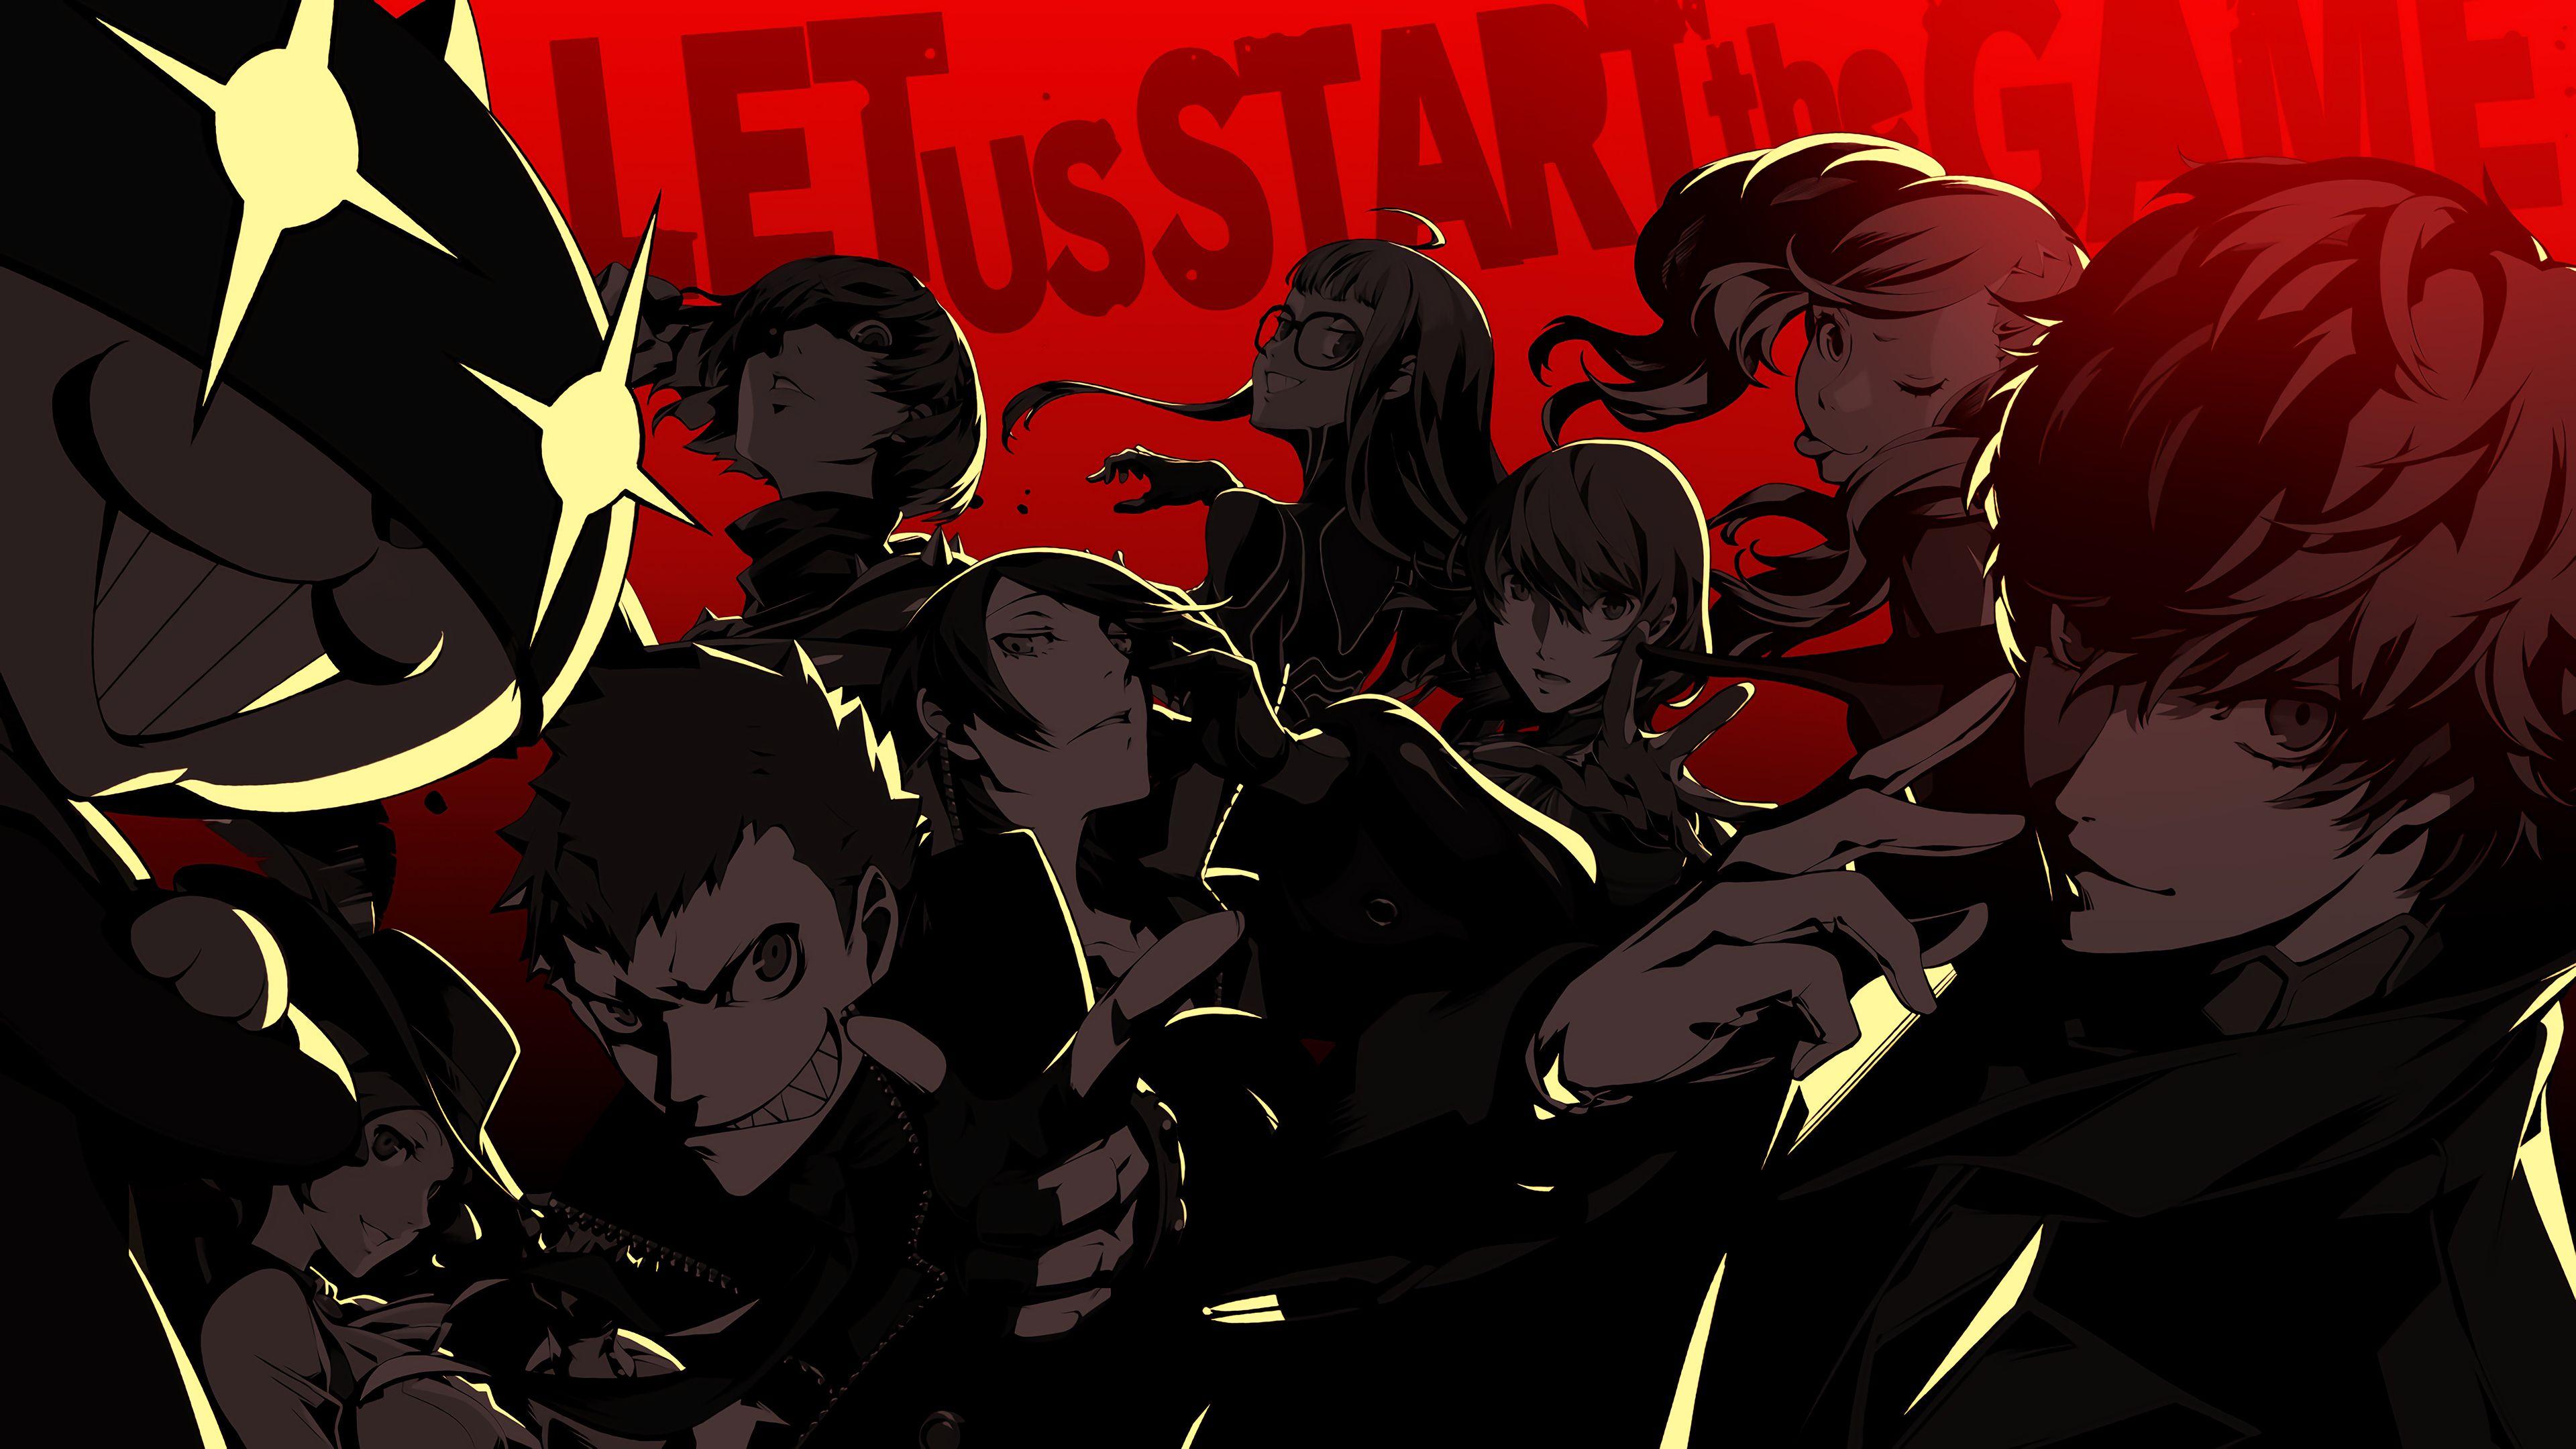 Persona 5 4k Wallpapers Top Free Persona 5 4k Backgrounds